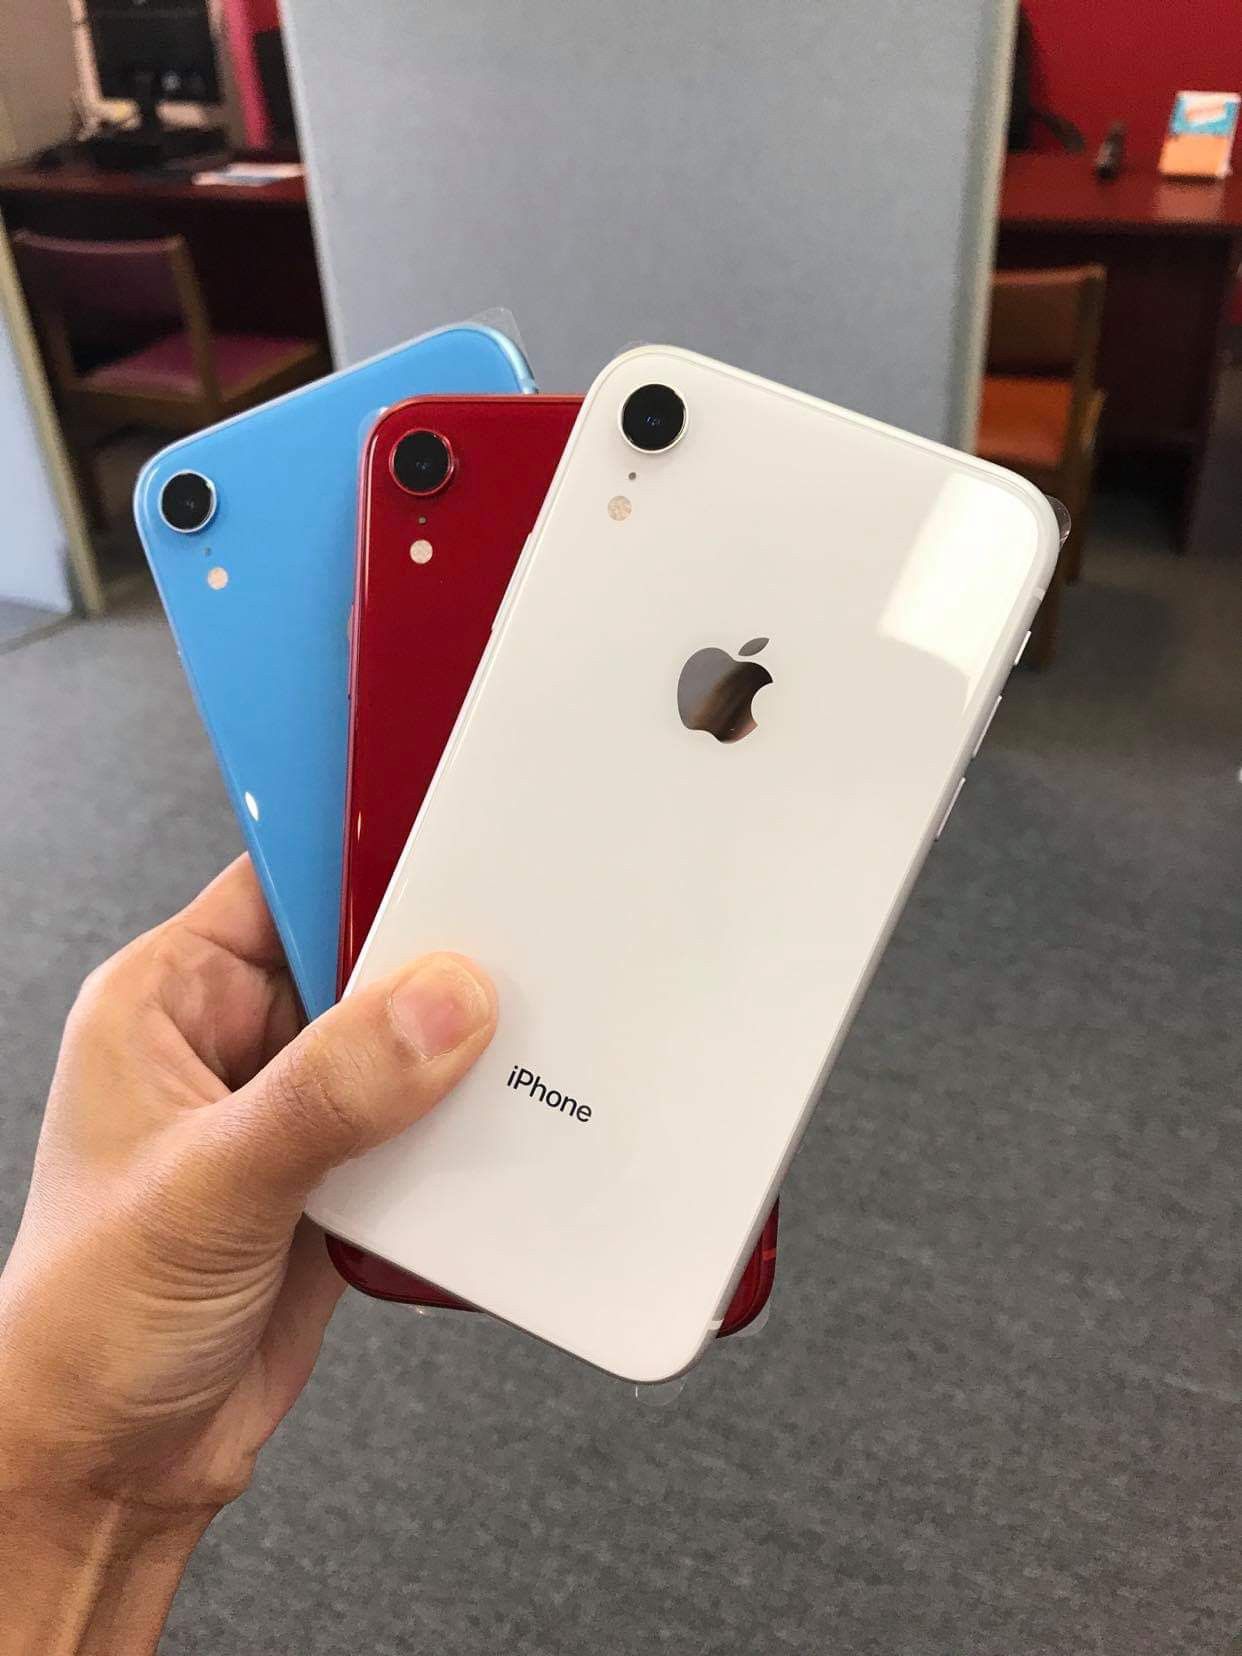 iPhone XR 64GB Unlocked Excellent Condition $489 each